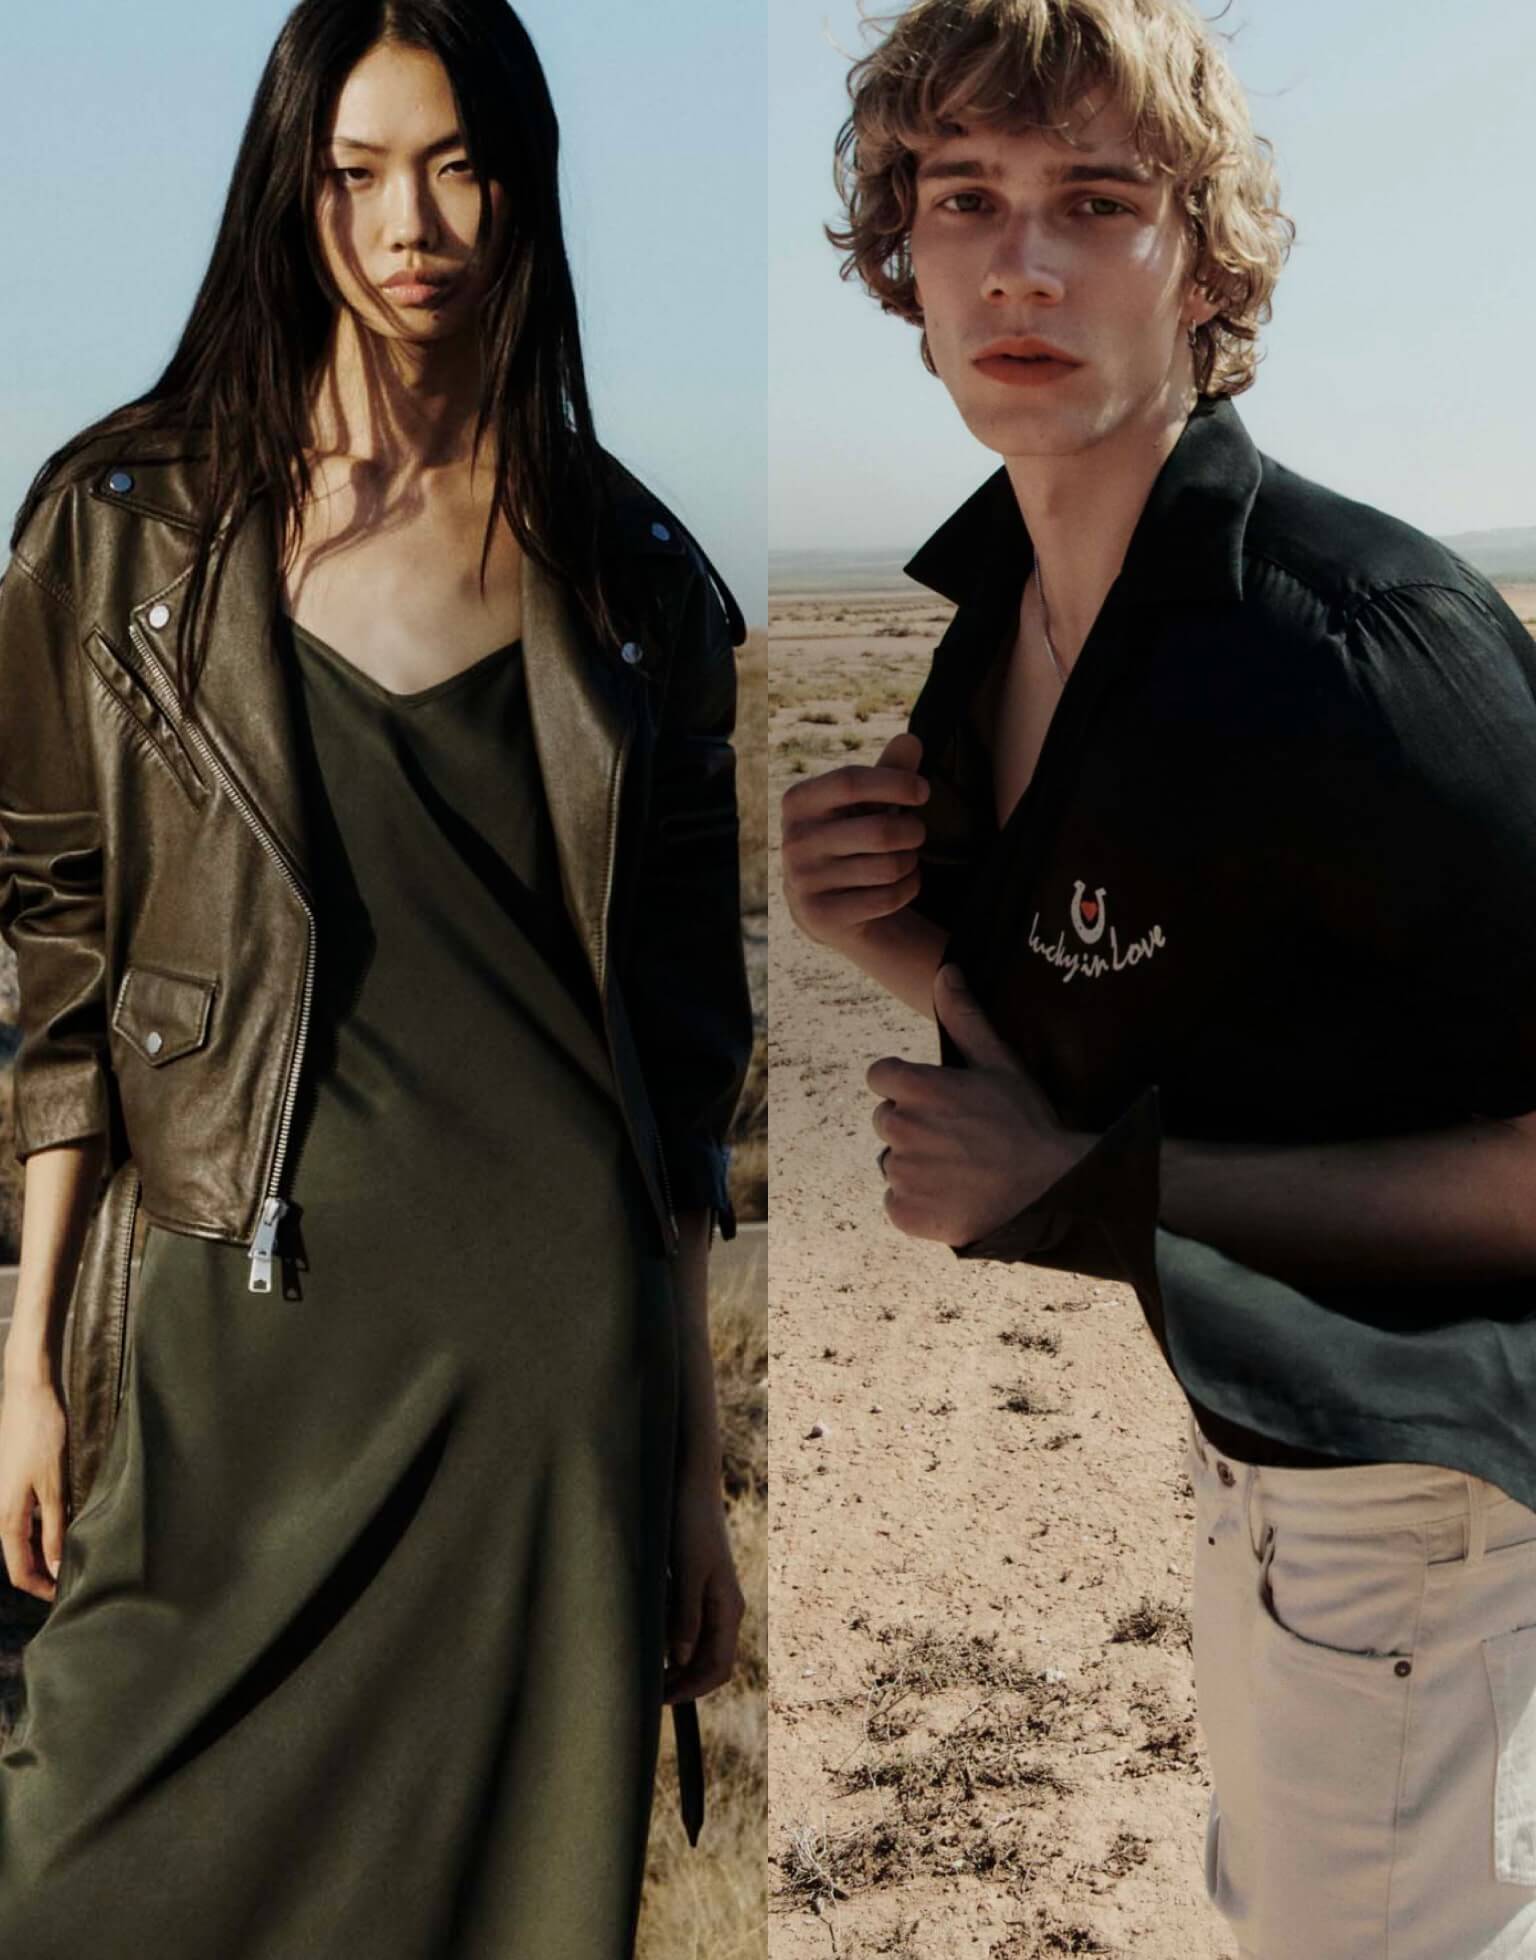 Two photographs showing a female and male models standing in the desert and wearing AllSaints clothes.